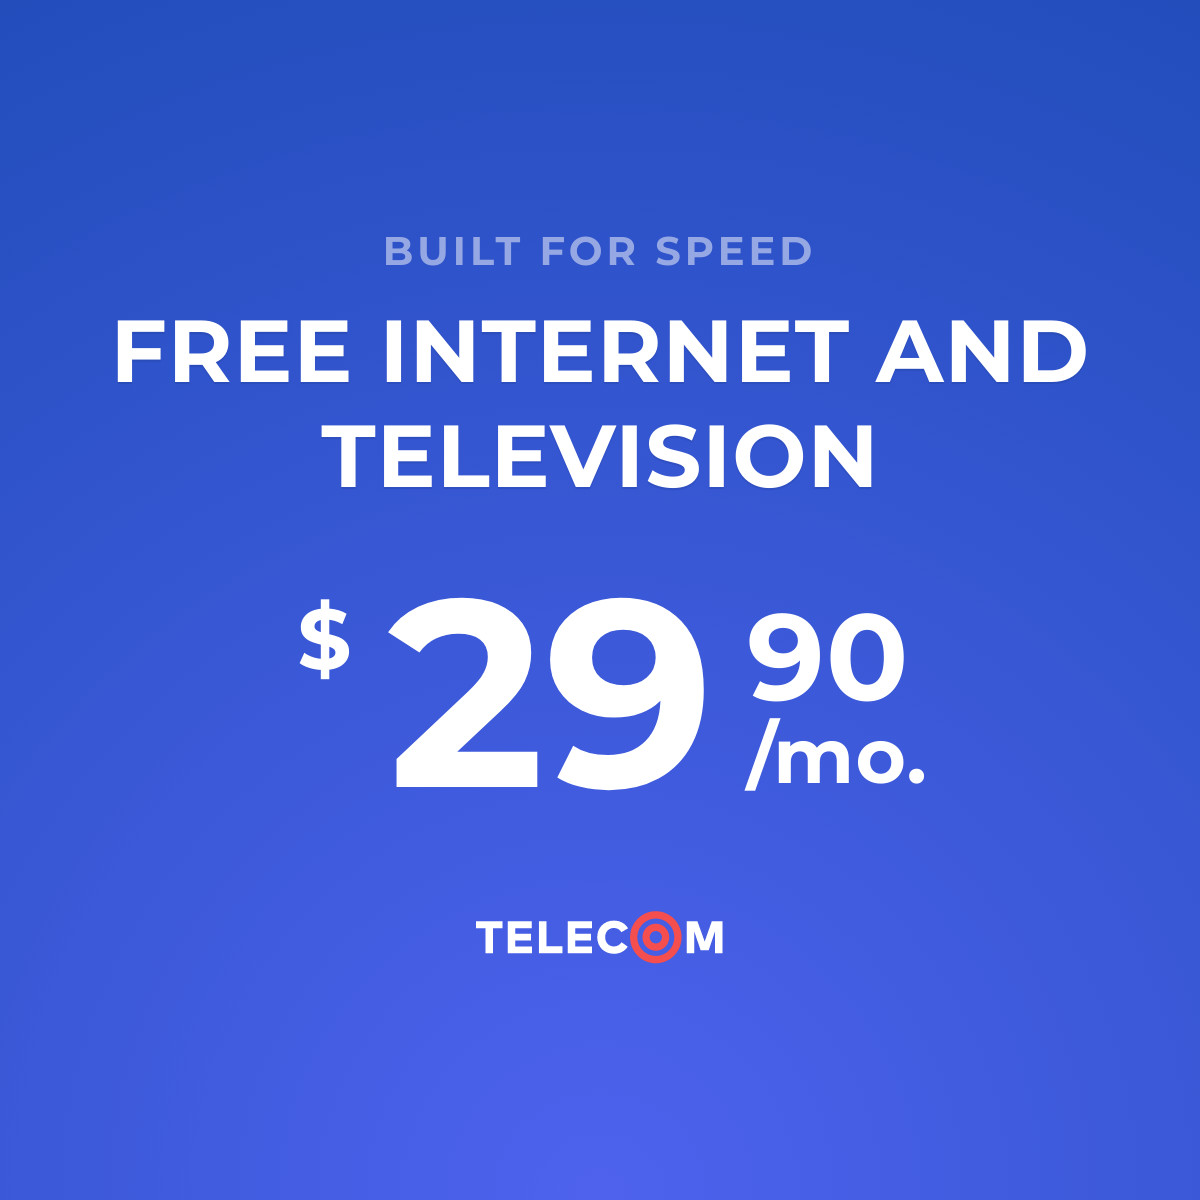 Free Internet and Television Inline Rectangle 300x250